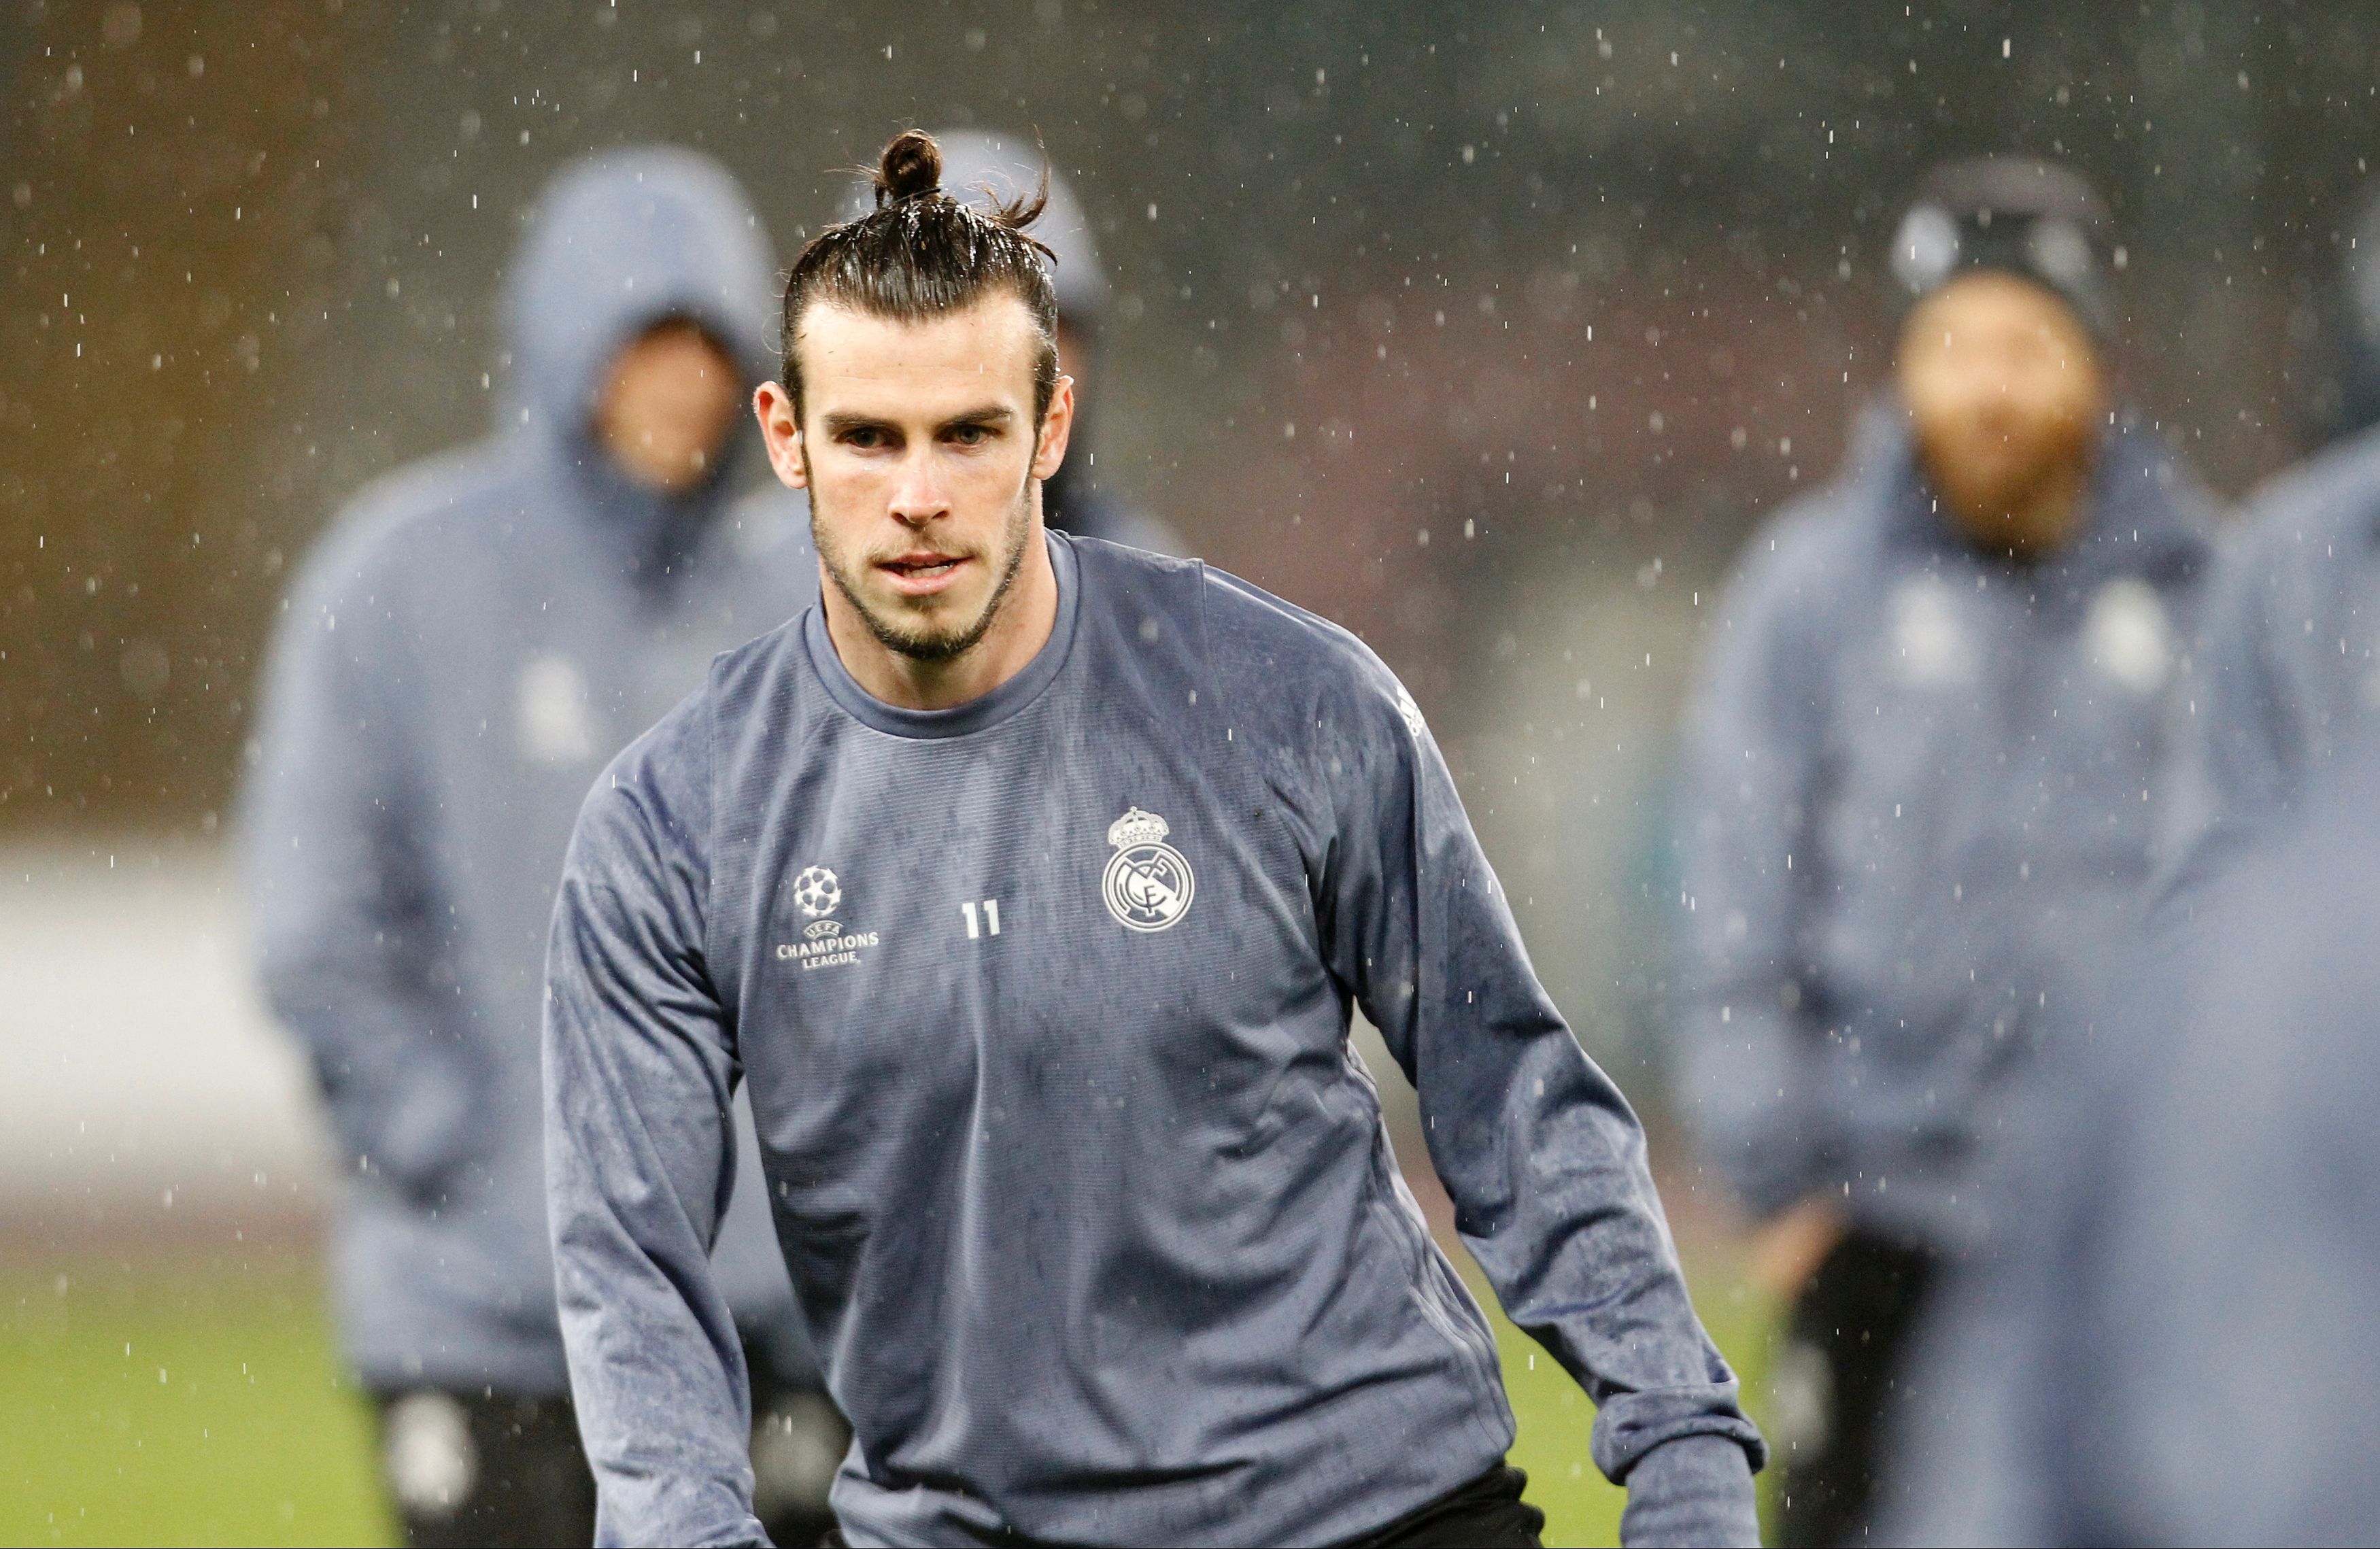 Real Madrid's Welsh forward Gareth Bale attends a training session under heavy rain on the eve of the Champions League football match Napoli vs Real Madrid on March 6, 2017 at the San Paolo stadium in Naples. / AFP PHOTO / CARLO HERMANN        (Photo credit should read CARLO HERMANN/AFP/Getty Images)